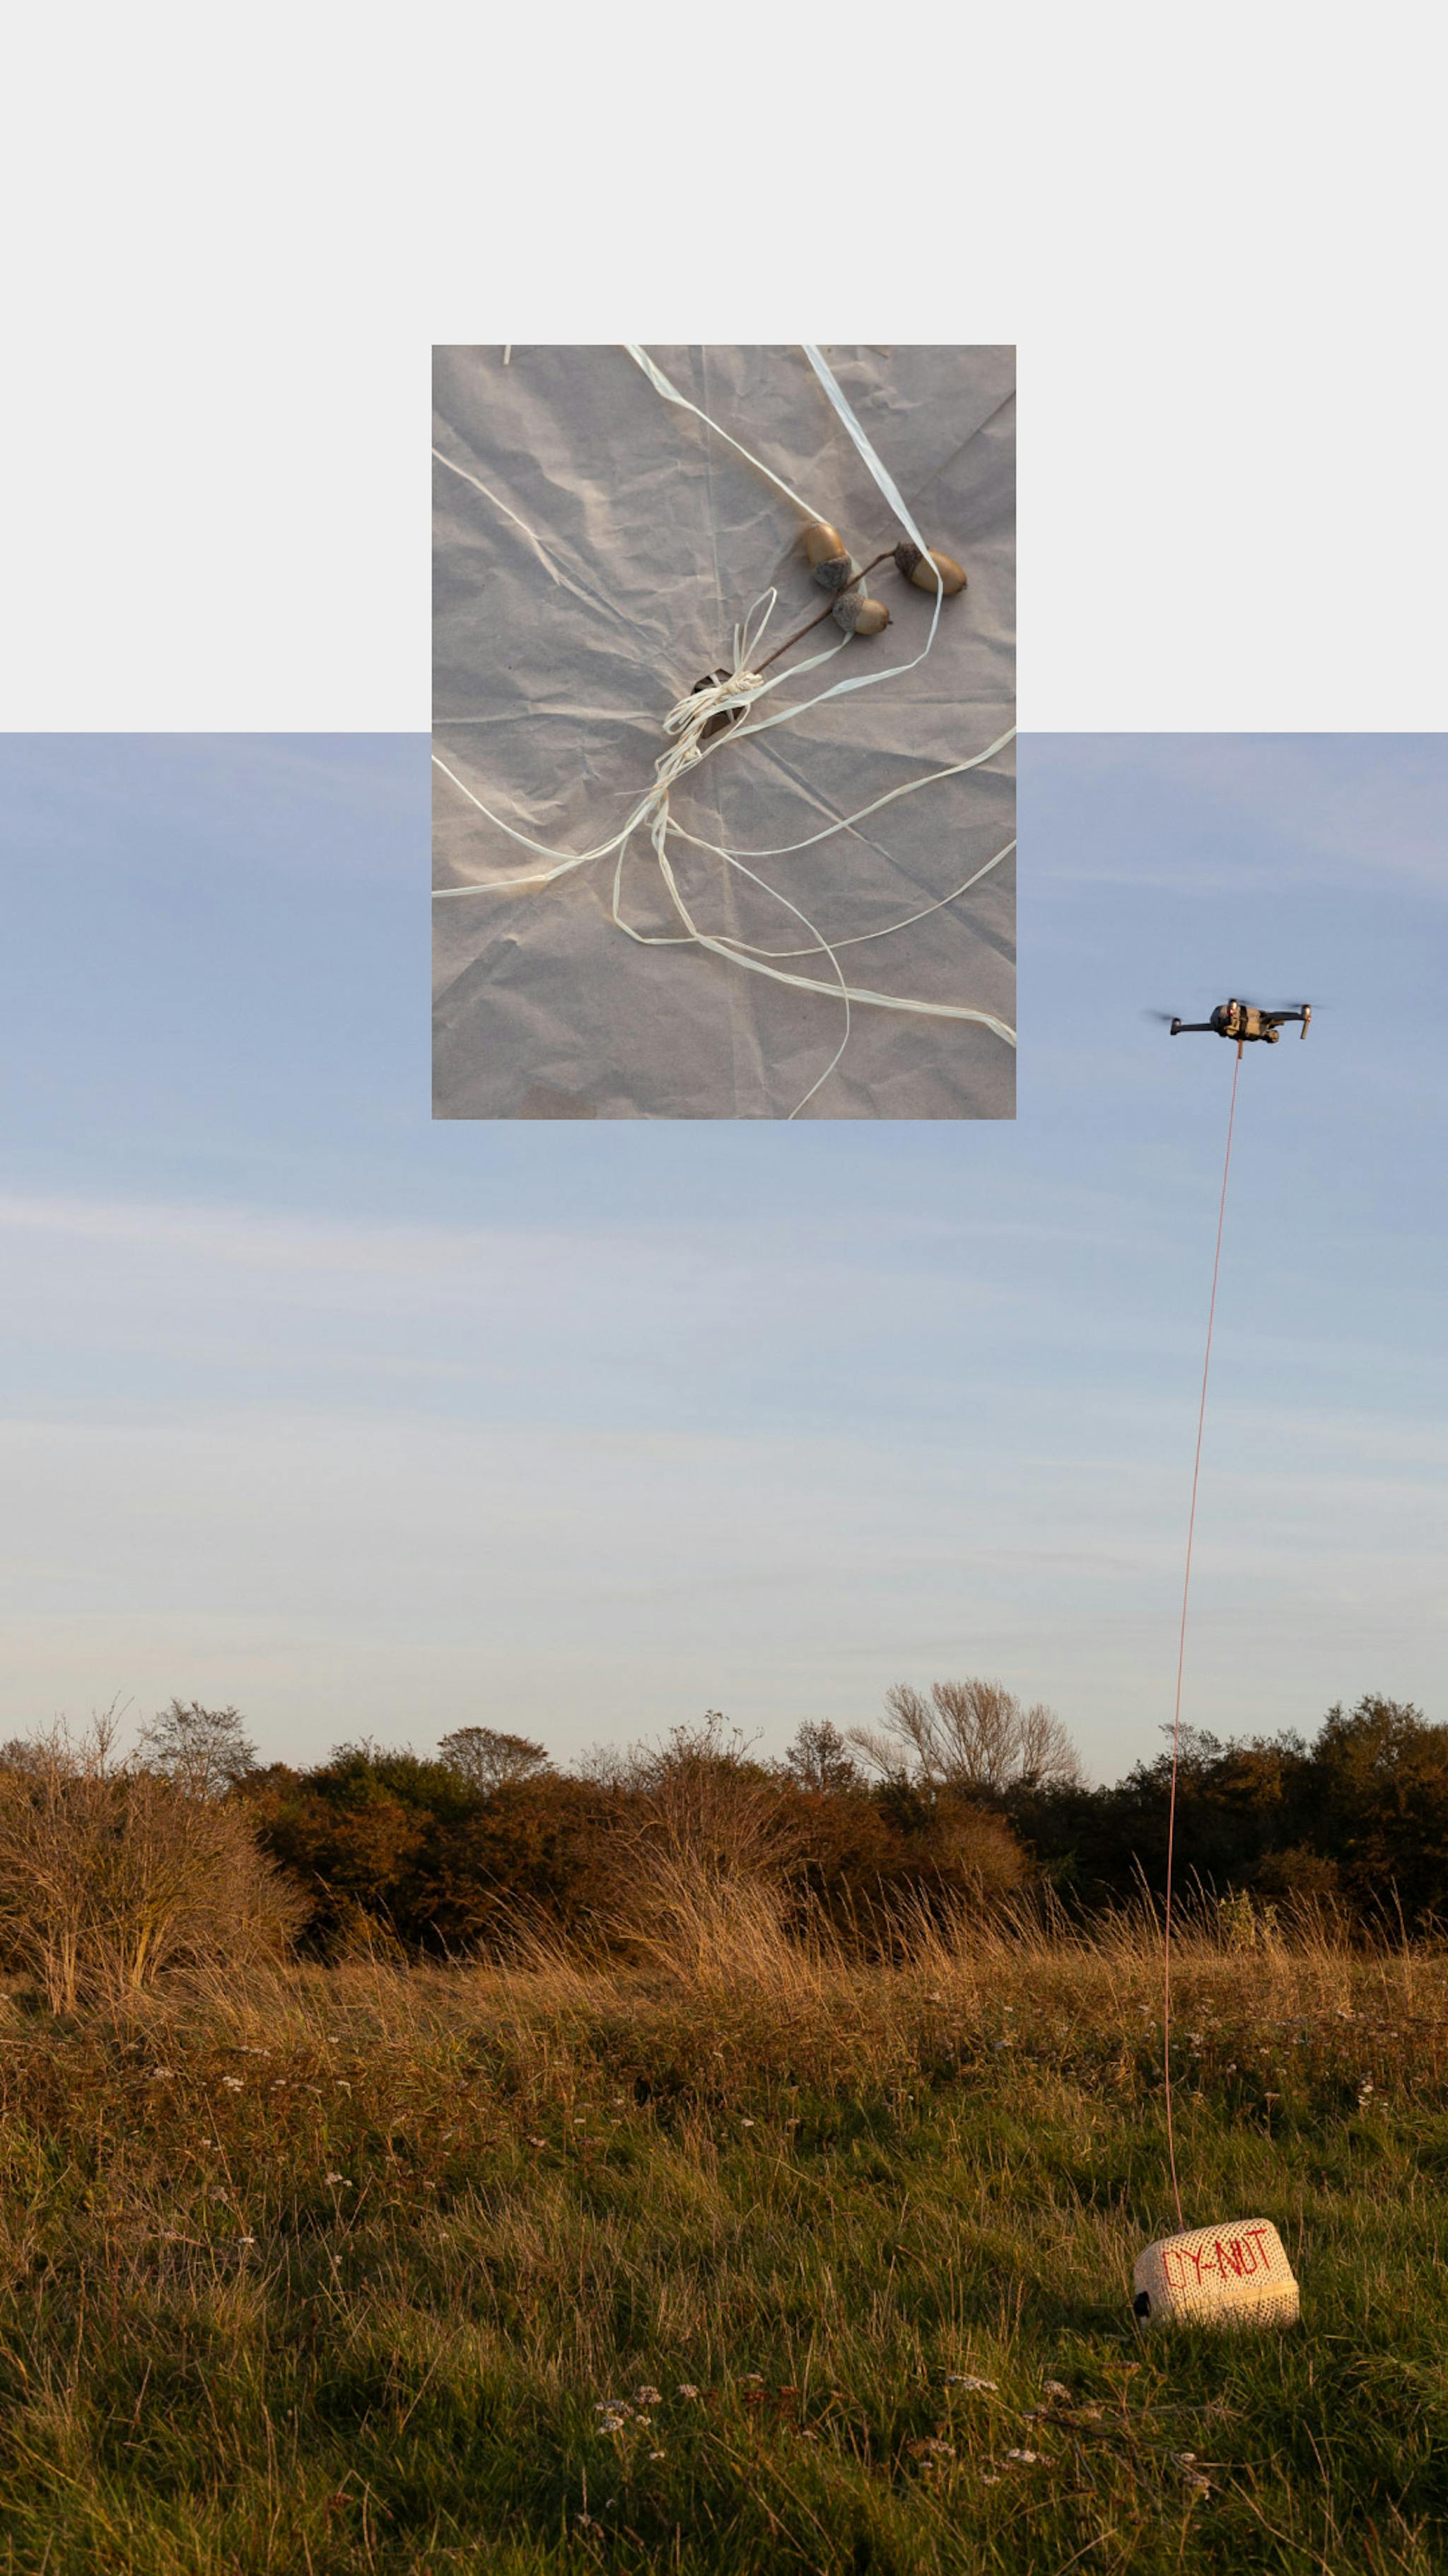 Two images: on the bottom is a drone lifting a basket from a field. On the top is a close up of acorns on paper with string. 